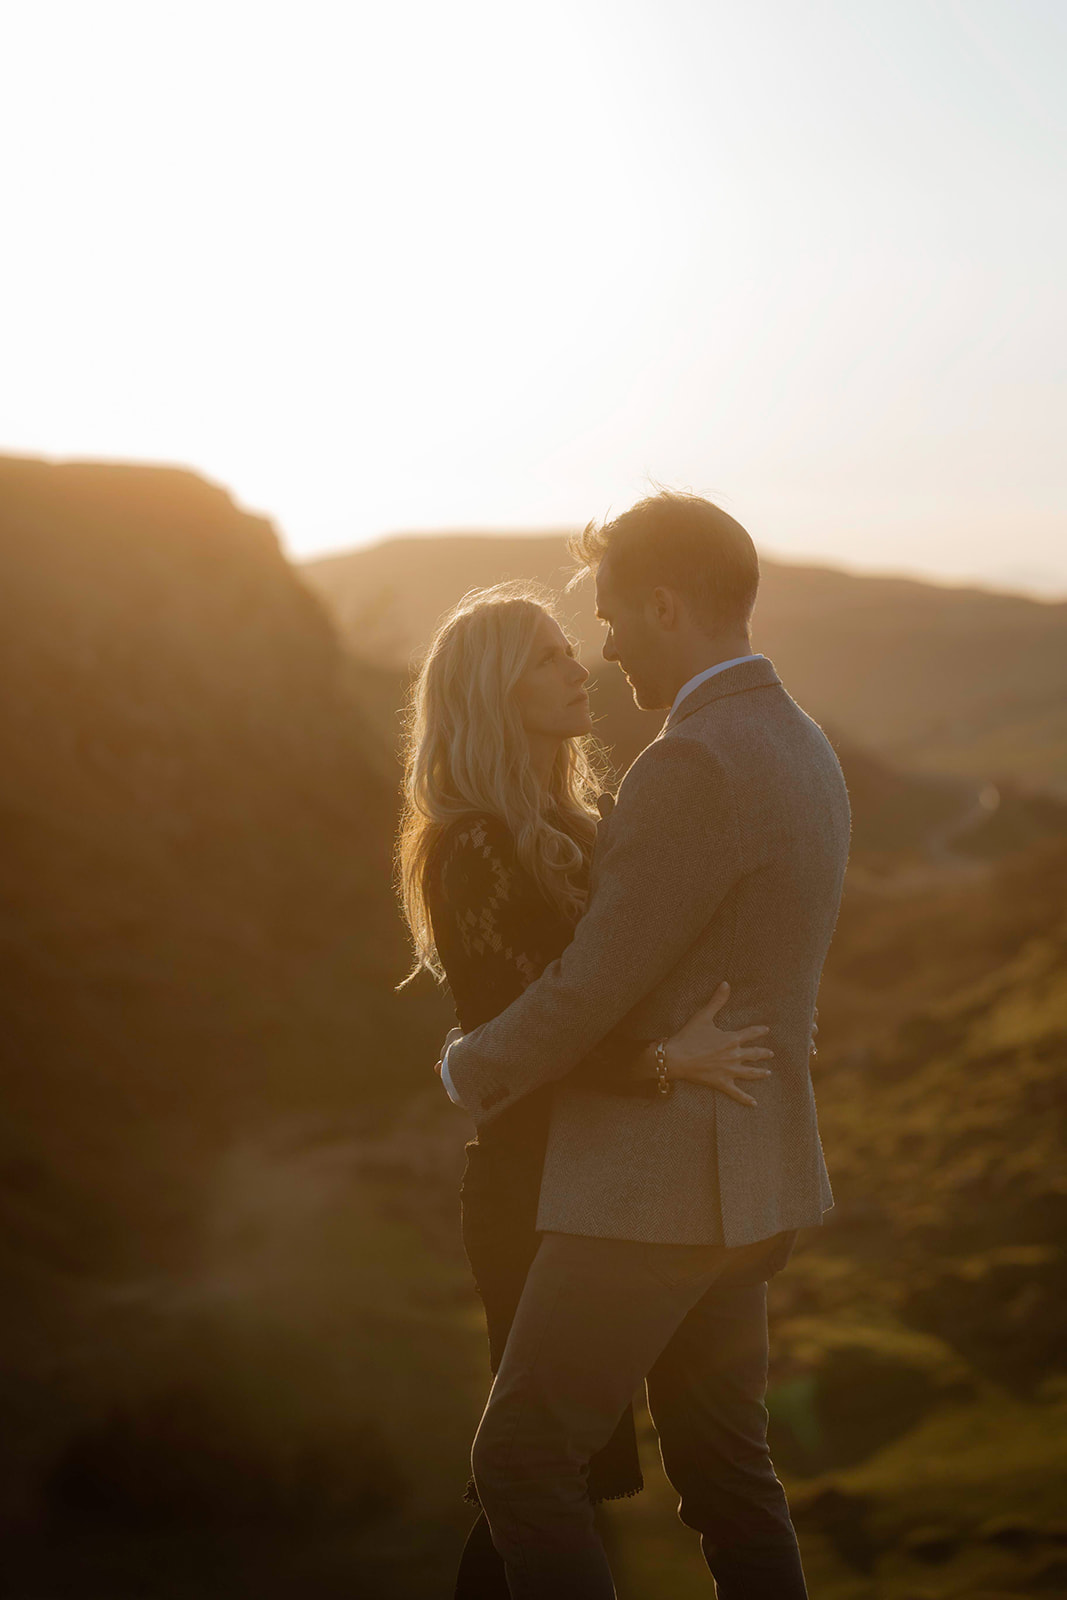 Kara and Andy shared a romantic moment at the Isle of Skye, Scotland with the beautiful sunset as their backdrop